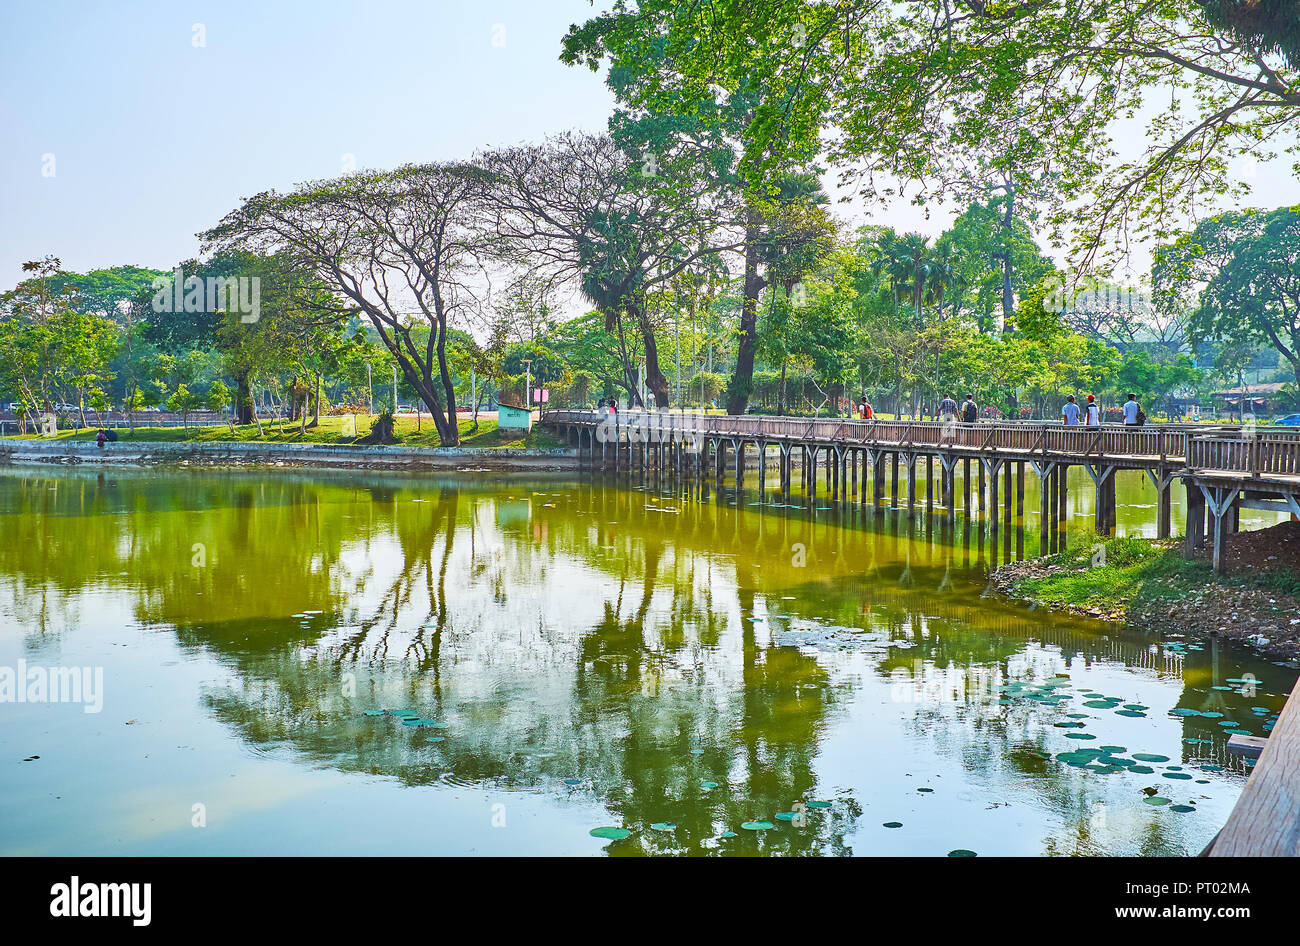 Kandawgyi Lake is one of the major city lakes, it's surrounded by lush green nature park with old spreading trees, attraction zones and cafes, Yangon, Stock Photo